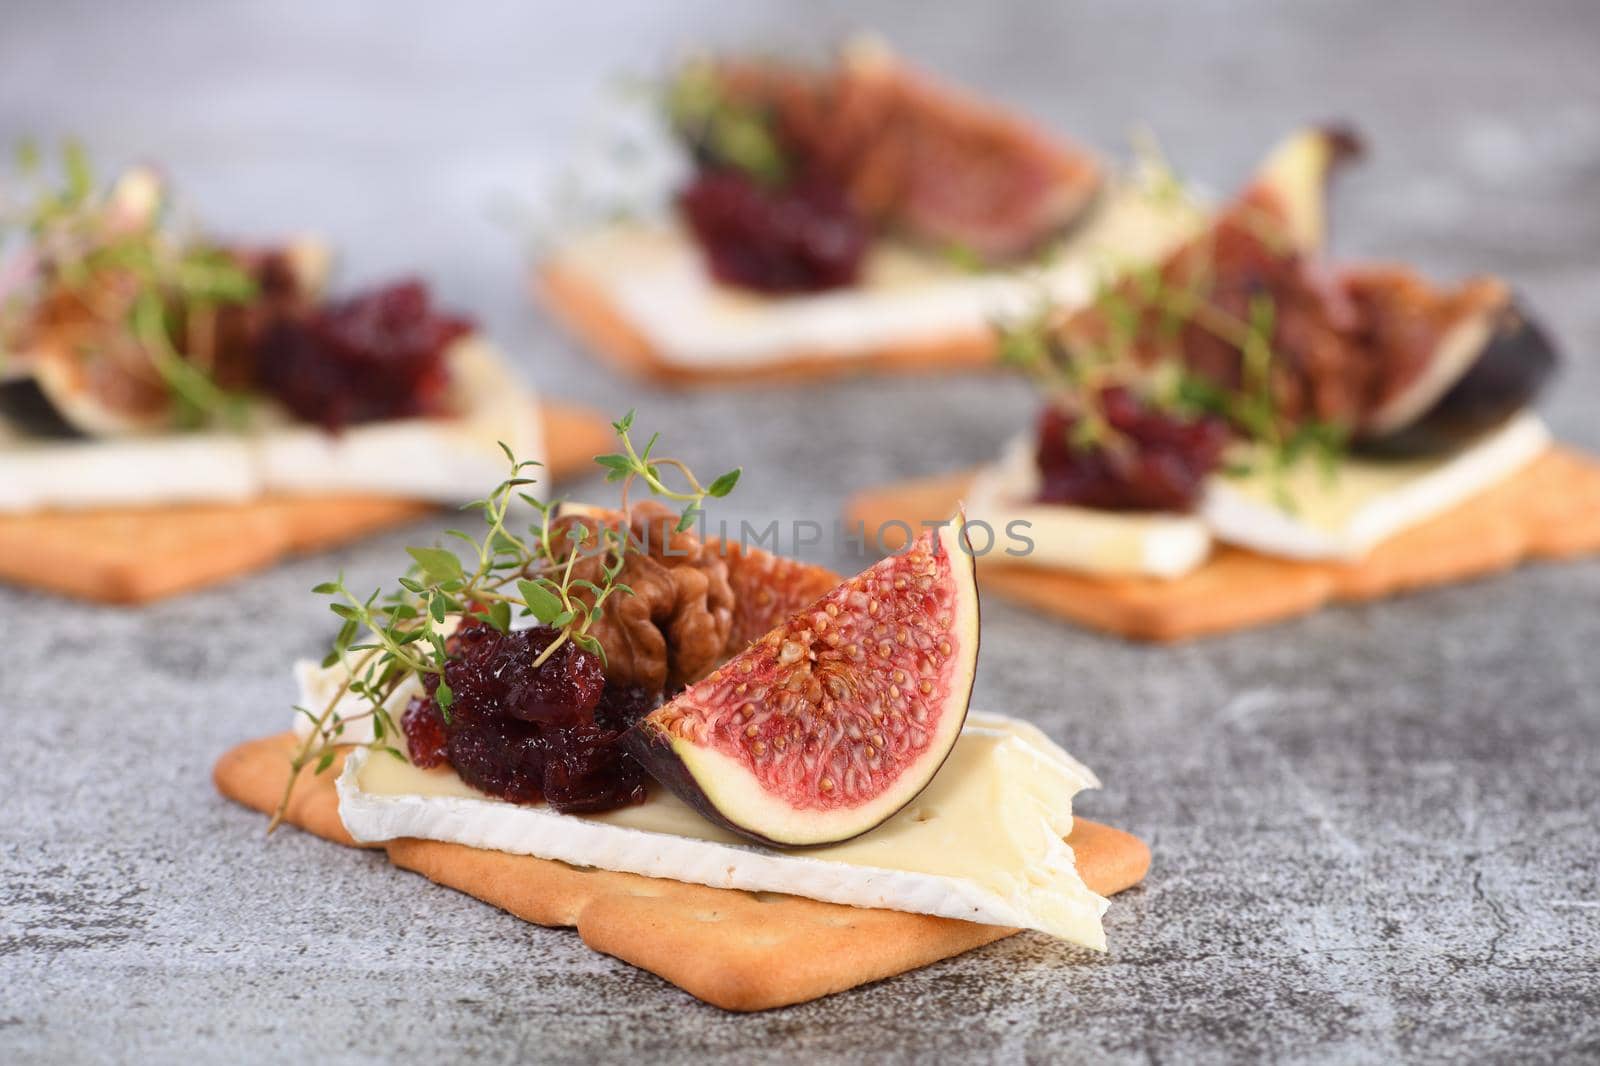 Cracker with a slice of camembert with confiture and figs by Apolonia